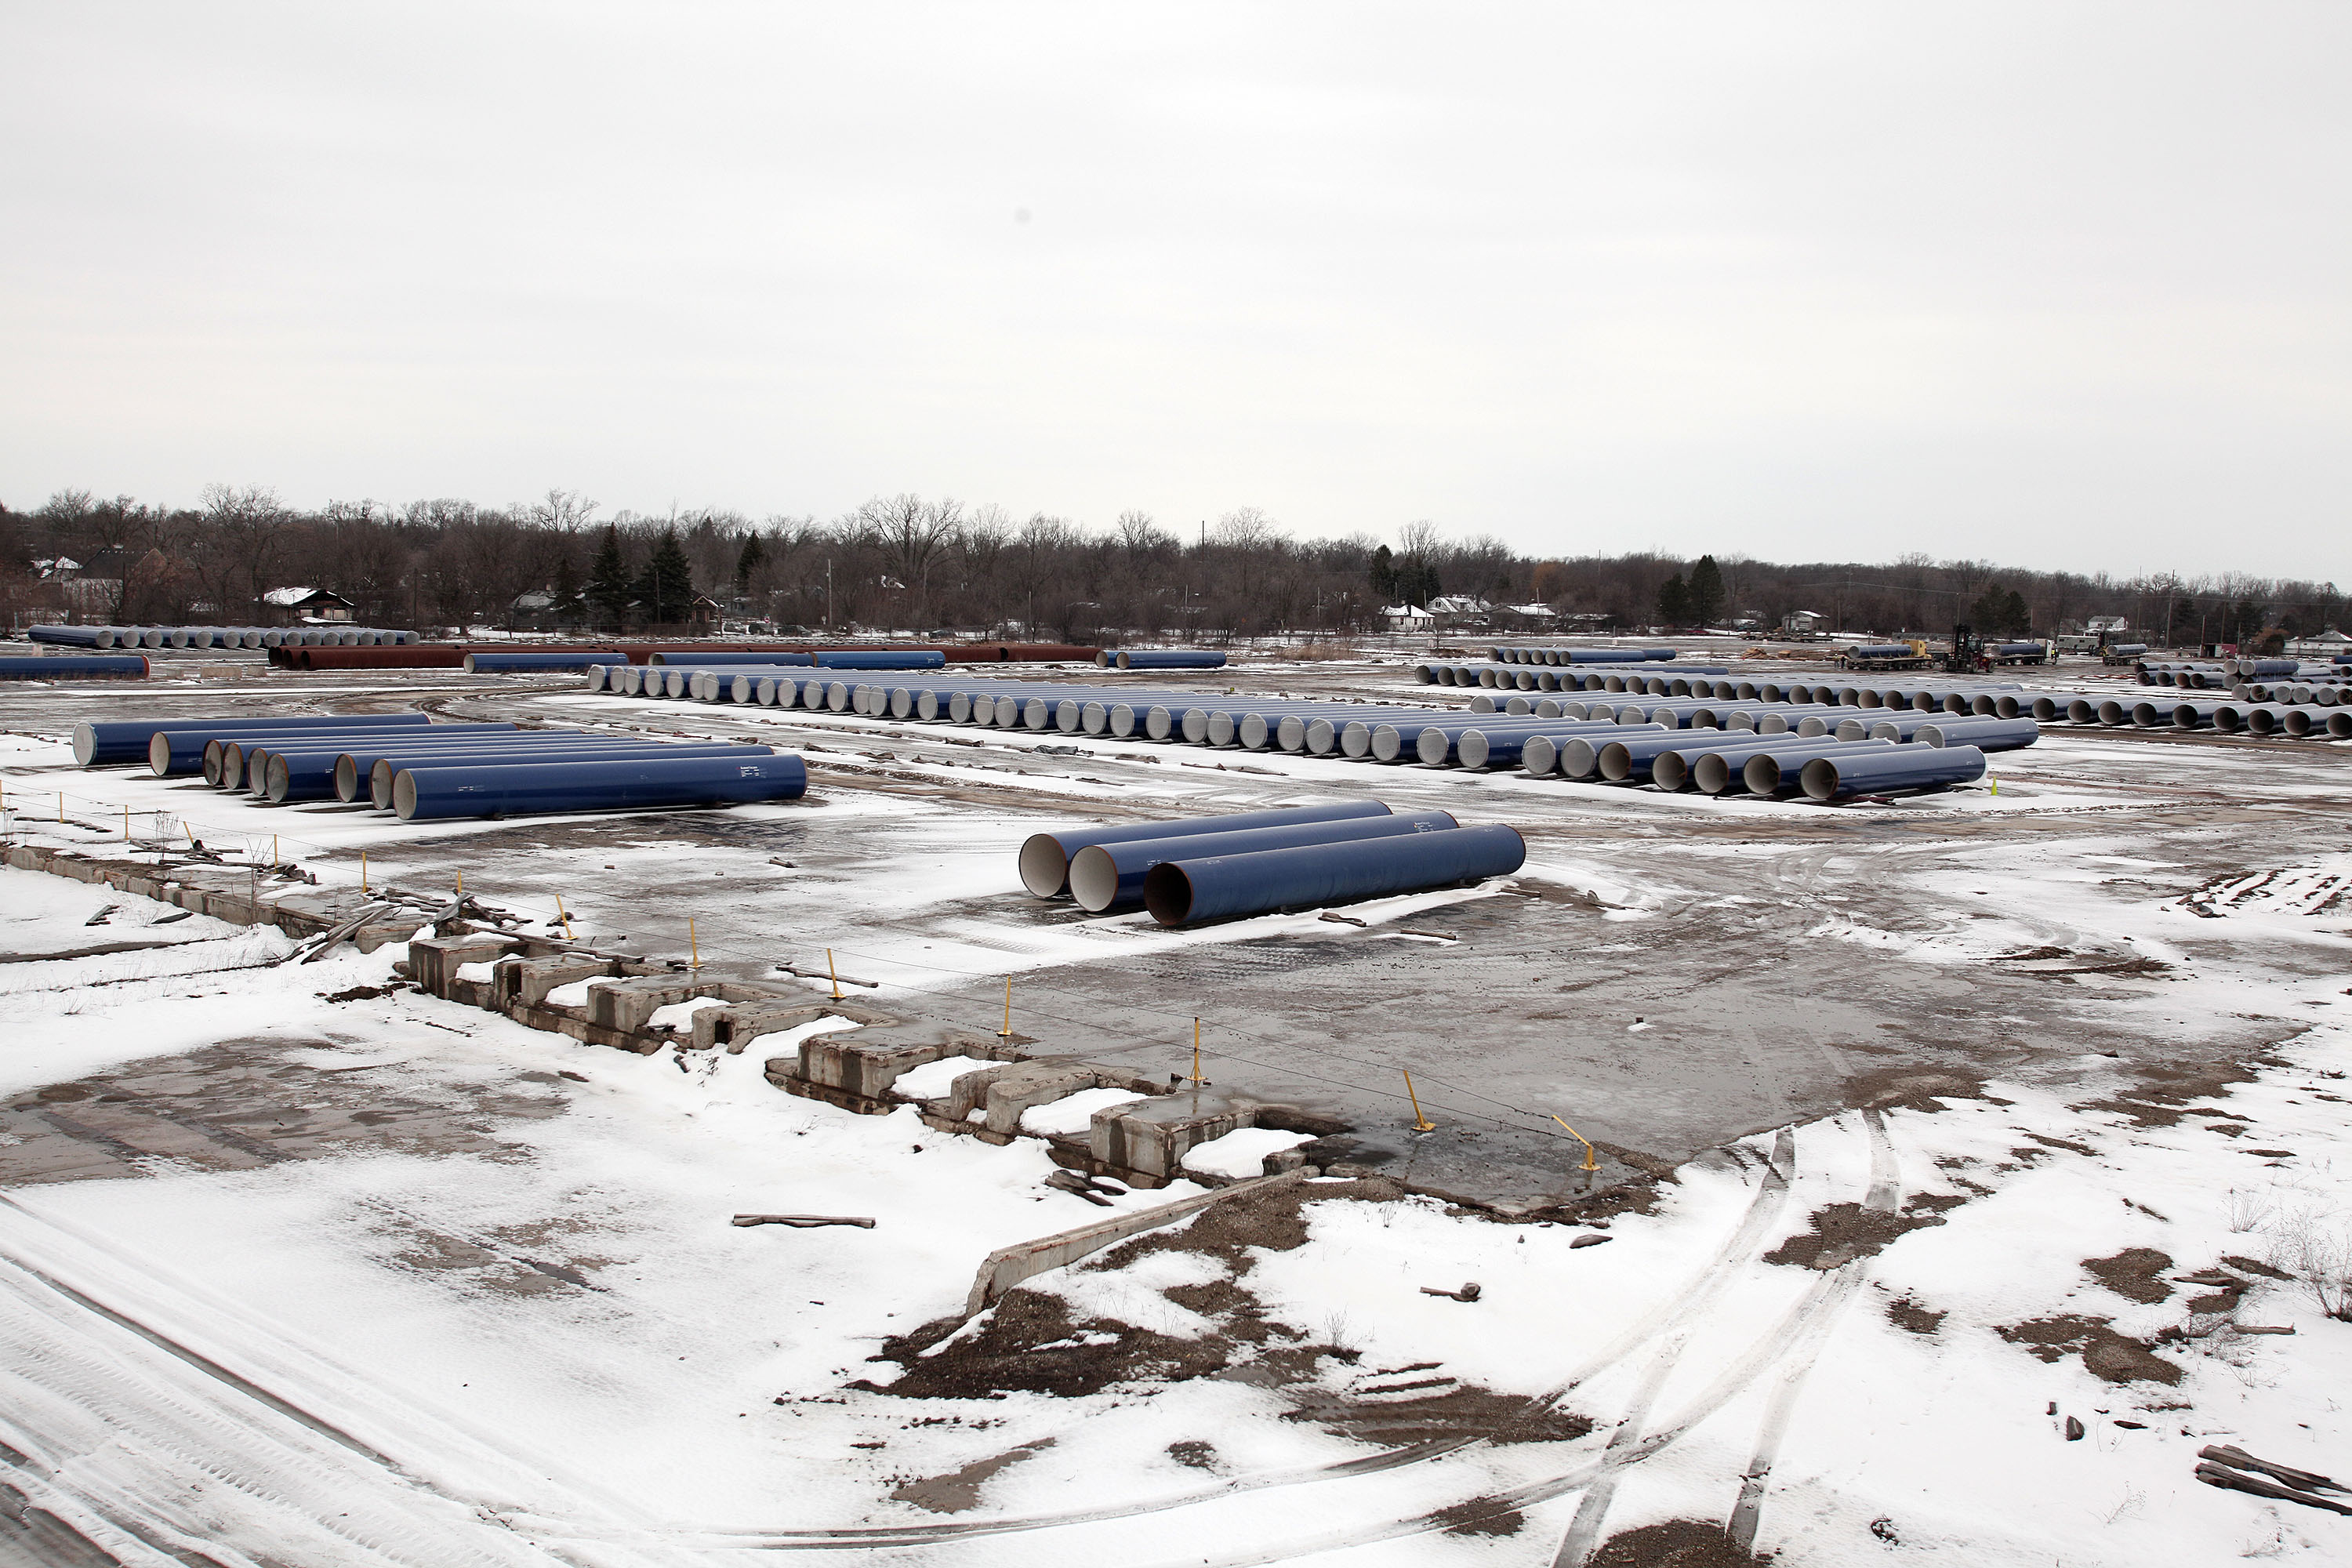 New water pipes awaiting installation are shown along the route of a national mile-long march, which was held to highlight the push for clean water in Flint, Mich., on Feb. 19, 2016. (Bill Pugliano—Getty Images)